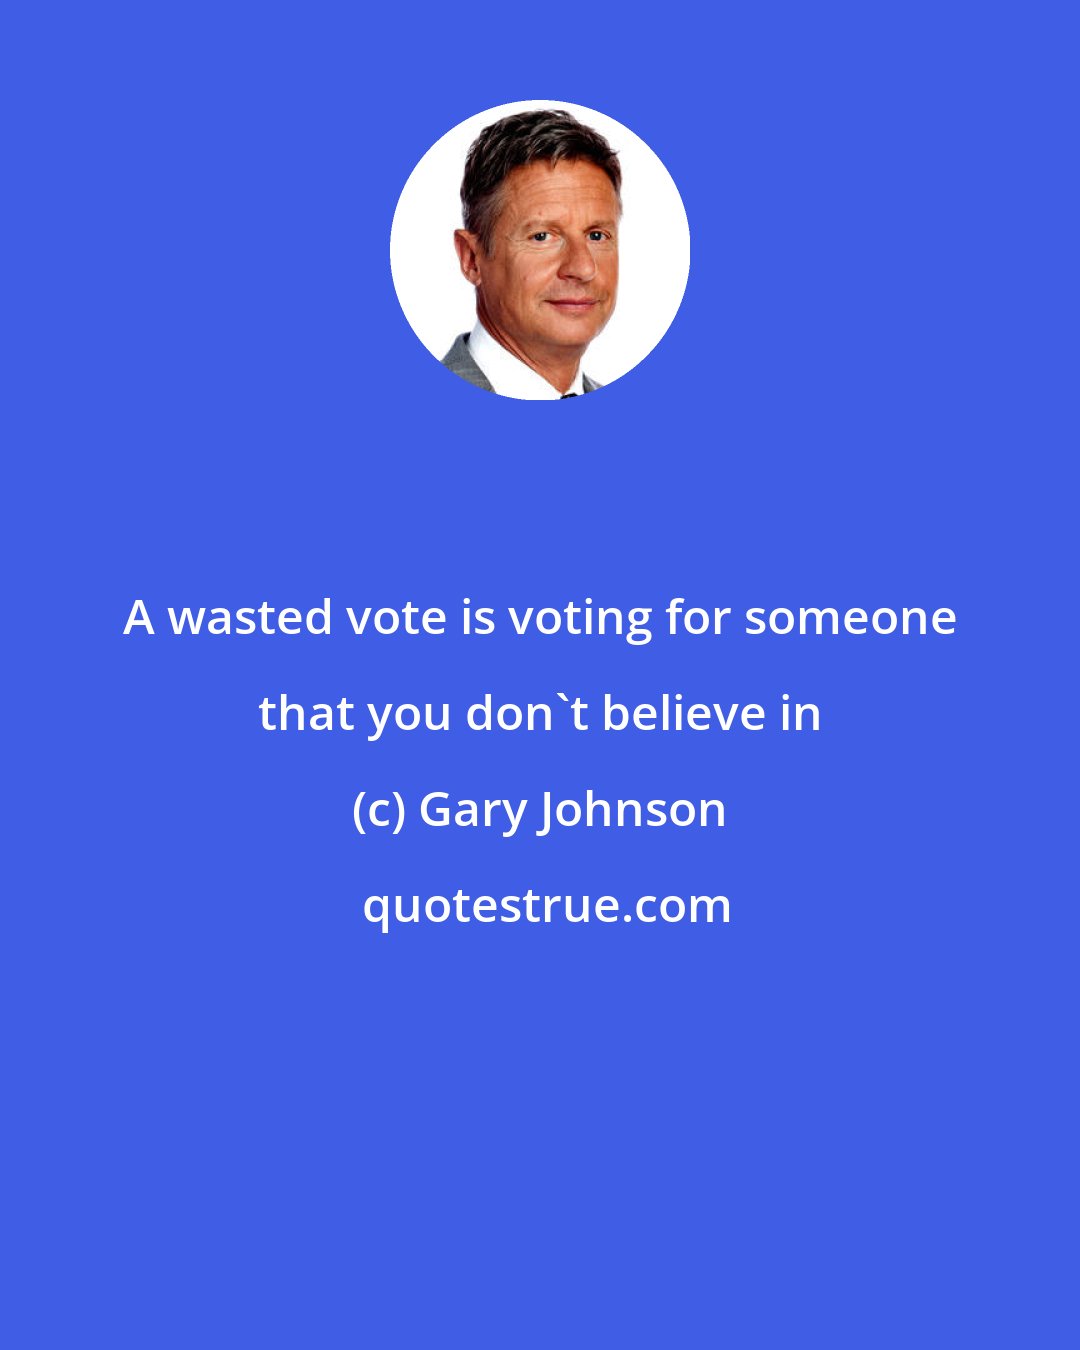 Gary Johnson: A wasted vote is voting for someone that you don't believe in